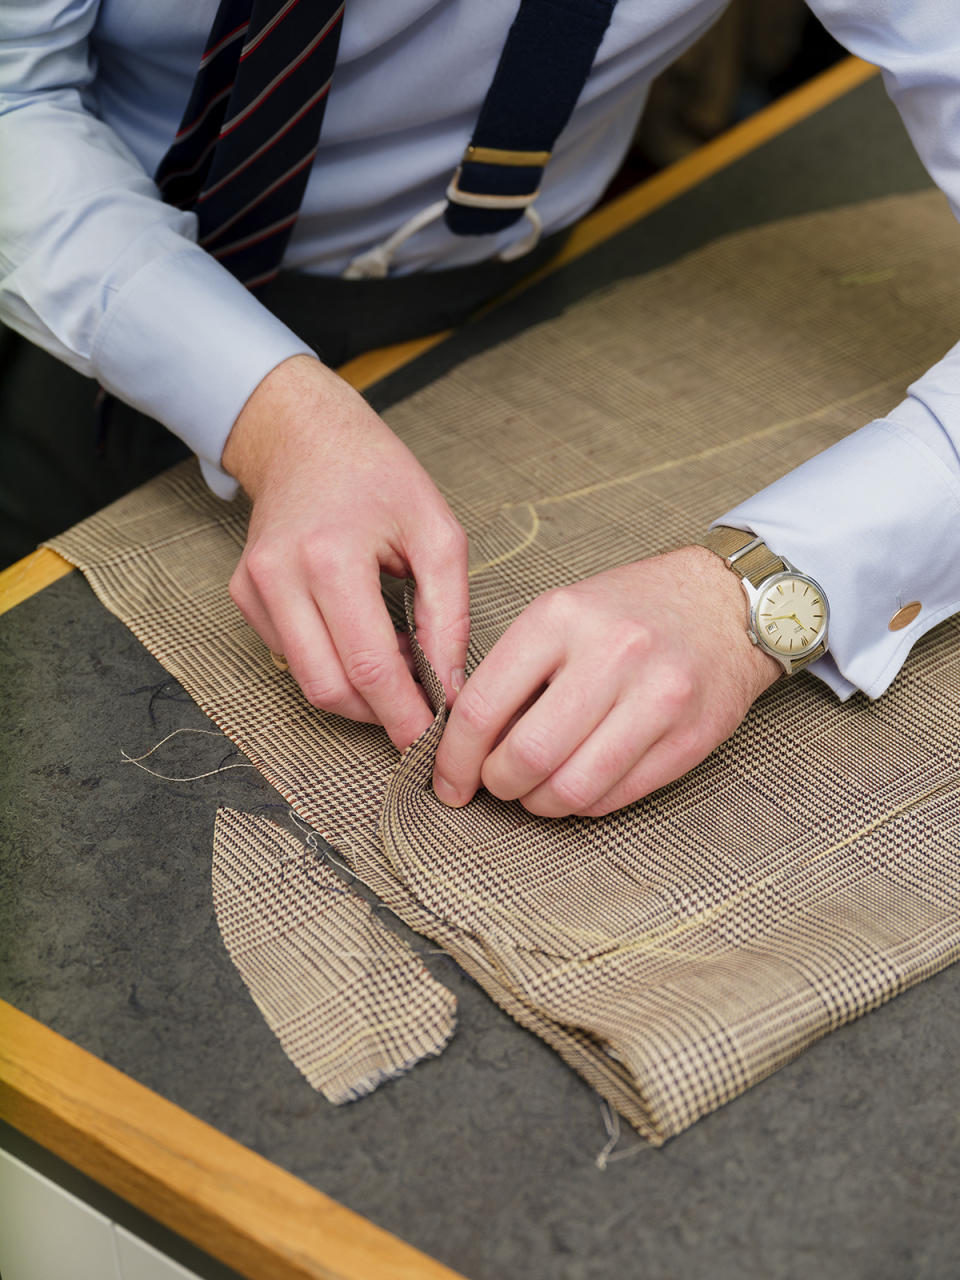 One of the bespoke tailors works on a linen suit at Bourdon House.